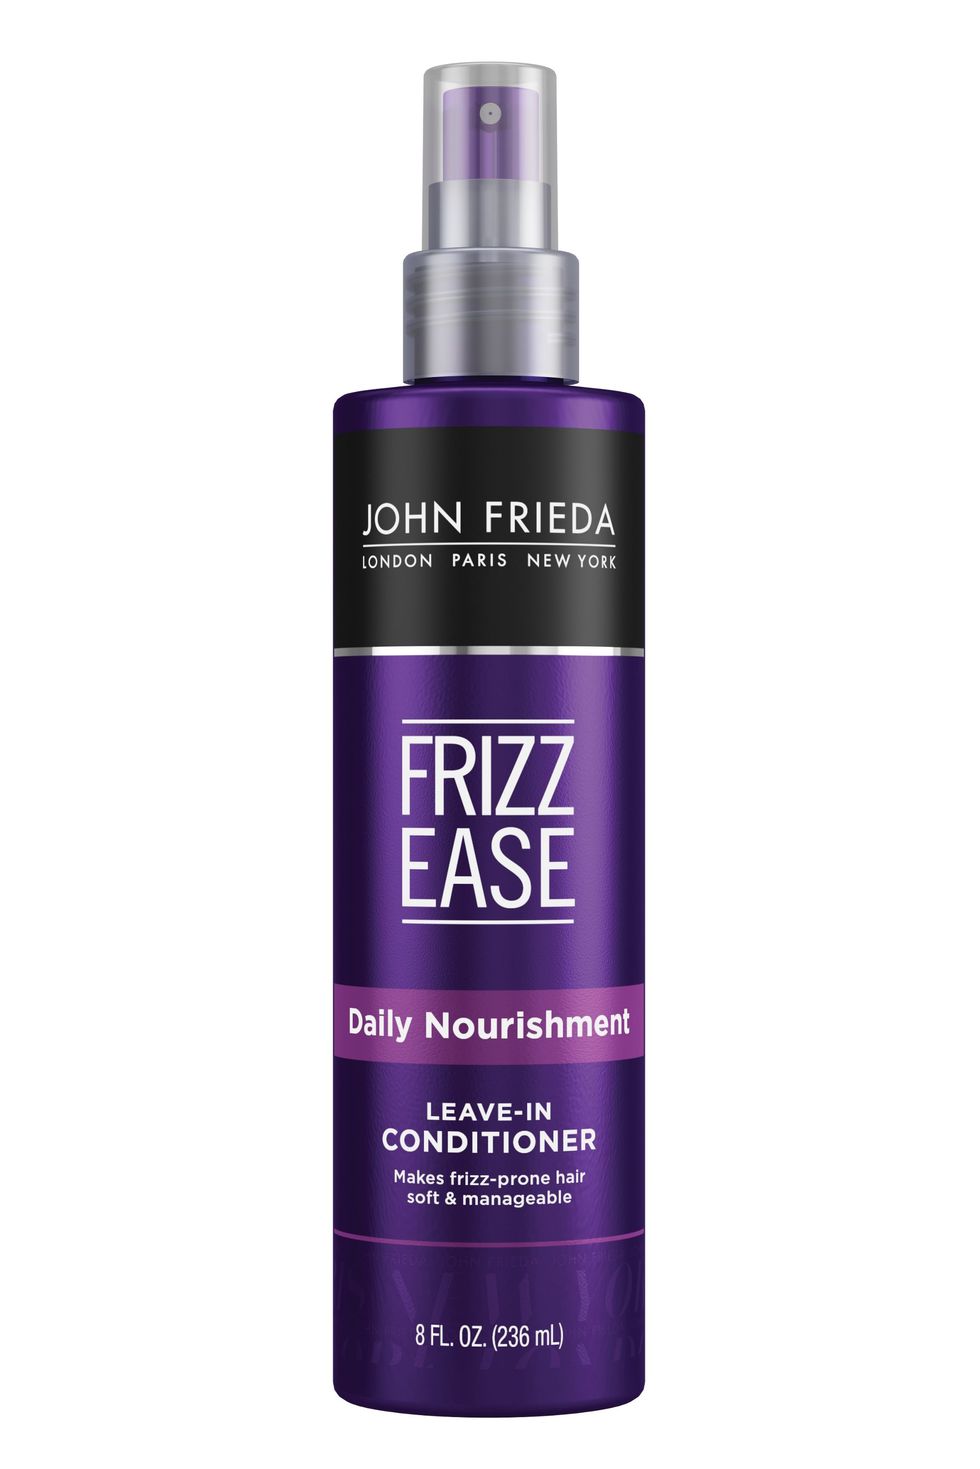 John Frieda Frizz Ease Leave-In Conditioner 